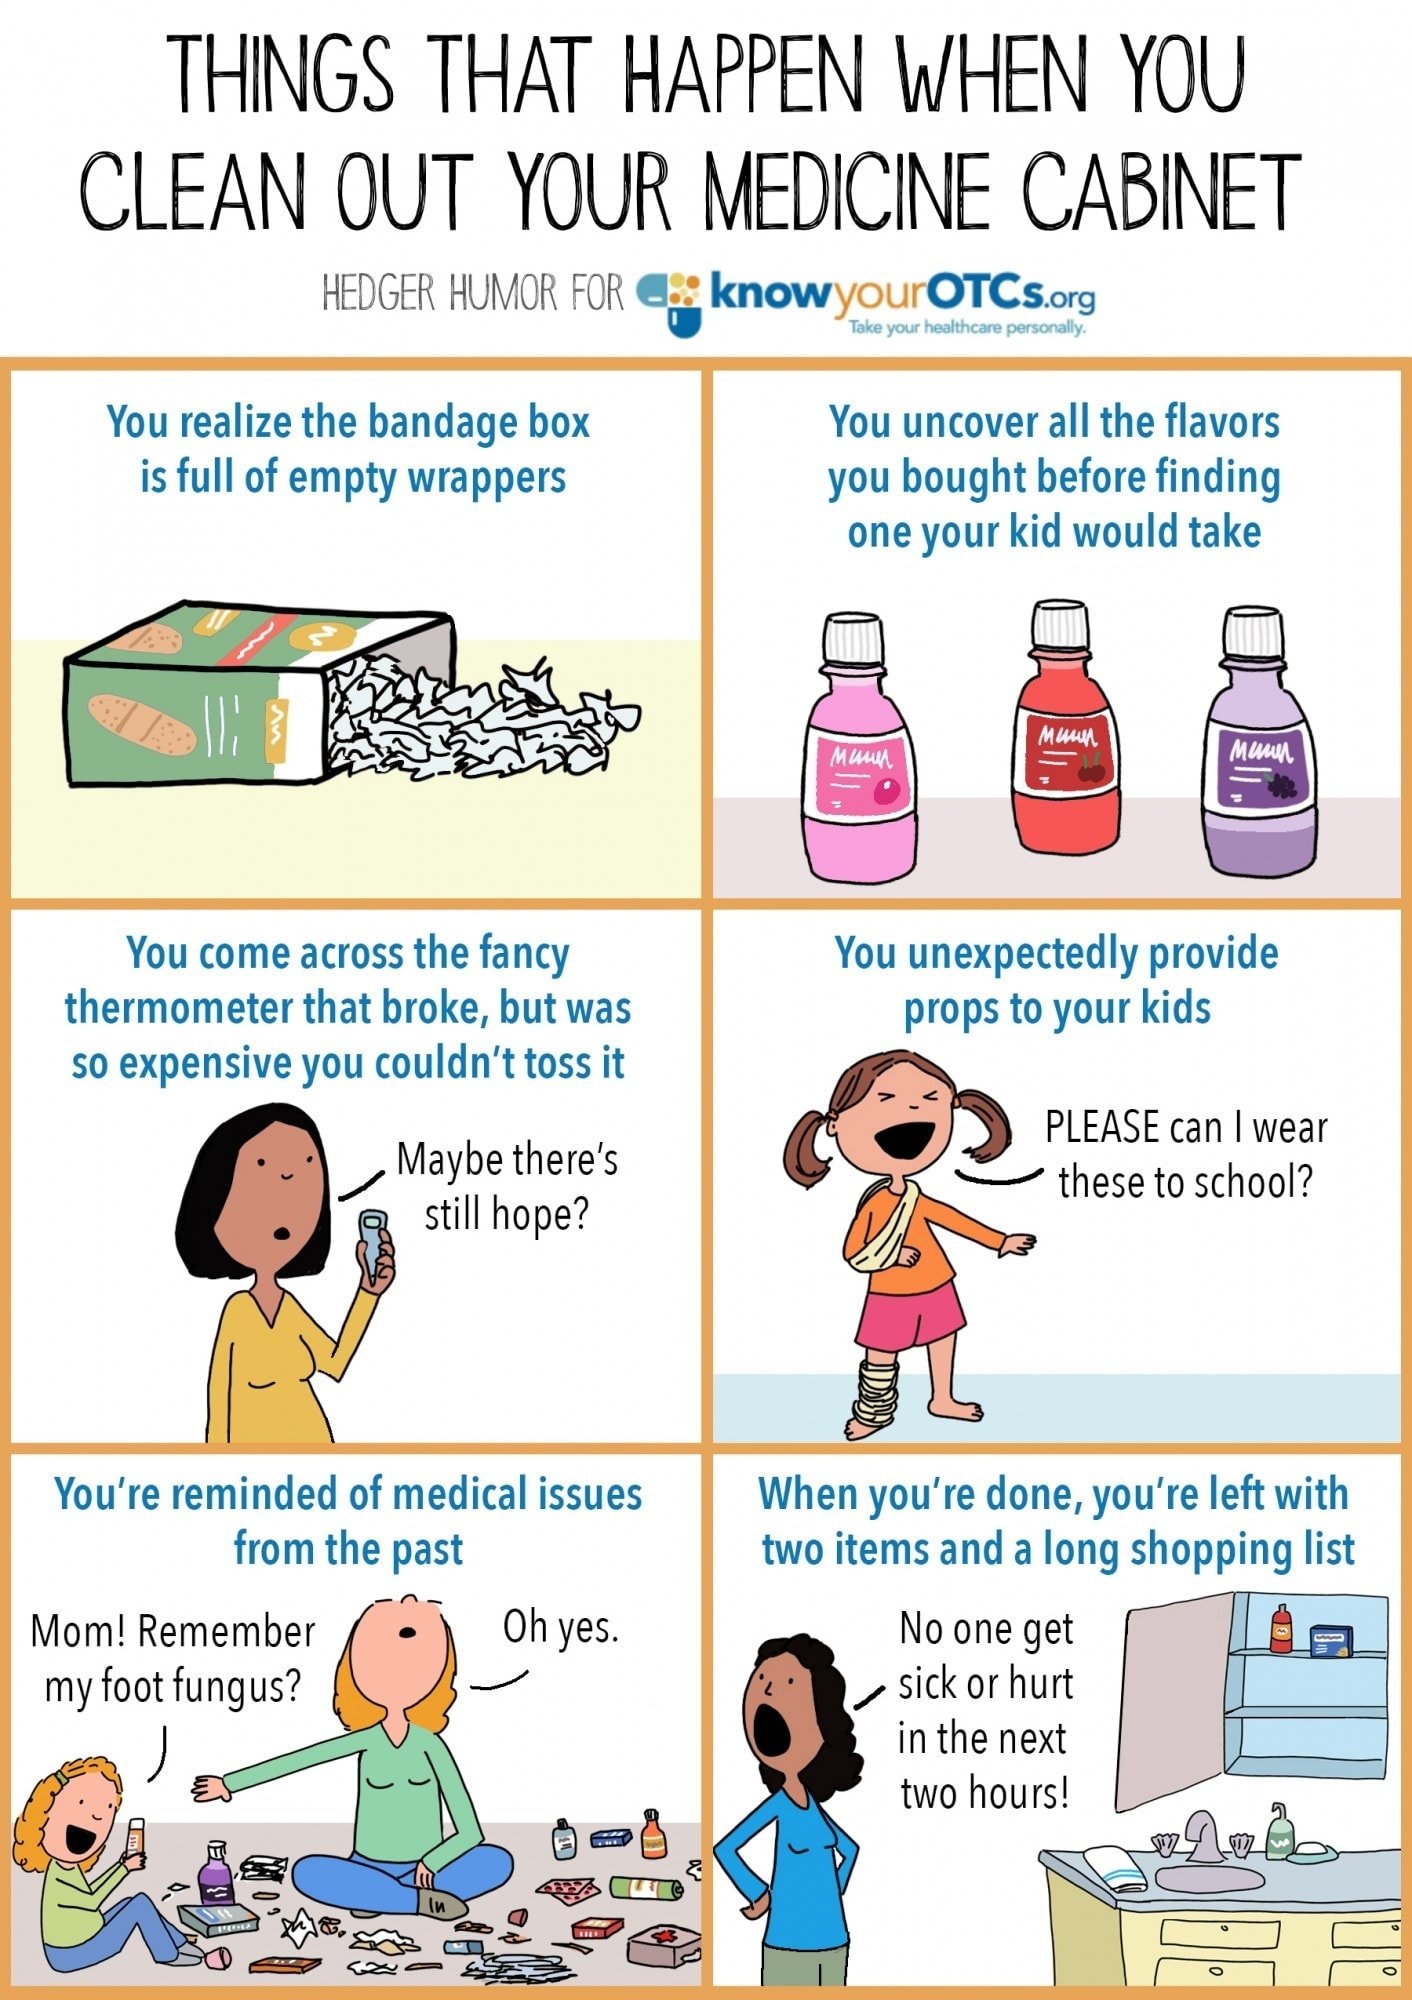 When it comes to Spring Cleaning we must not forget the expired meds! Check out these spring cleaning tips for safe disposal of expired meds! #springcleaning #expiredmeds #springcleaningplan #springcleaningchecklist #springcleaningtips #bathroomspringcleaning #cleaningmedicinecabinet #citygirlgonemom #declutterbathroom